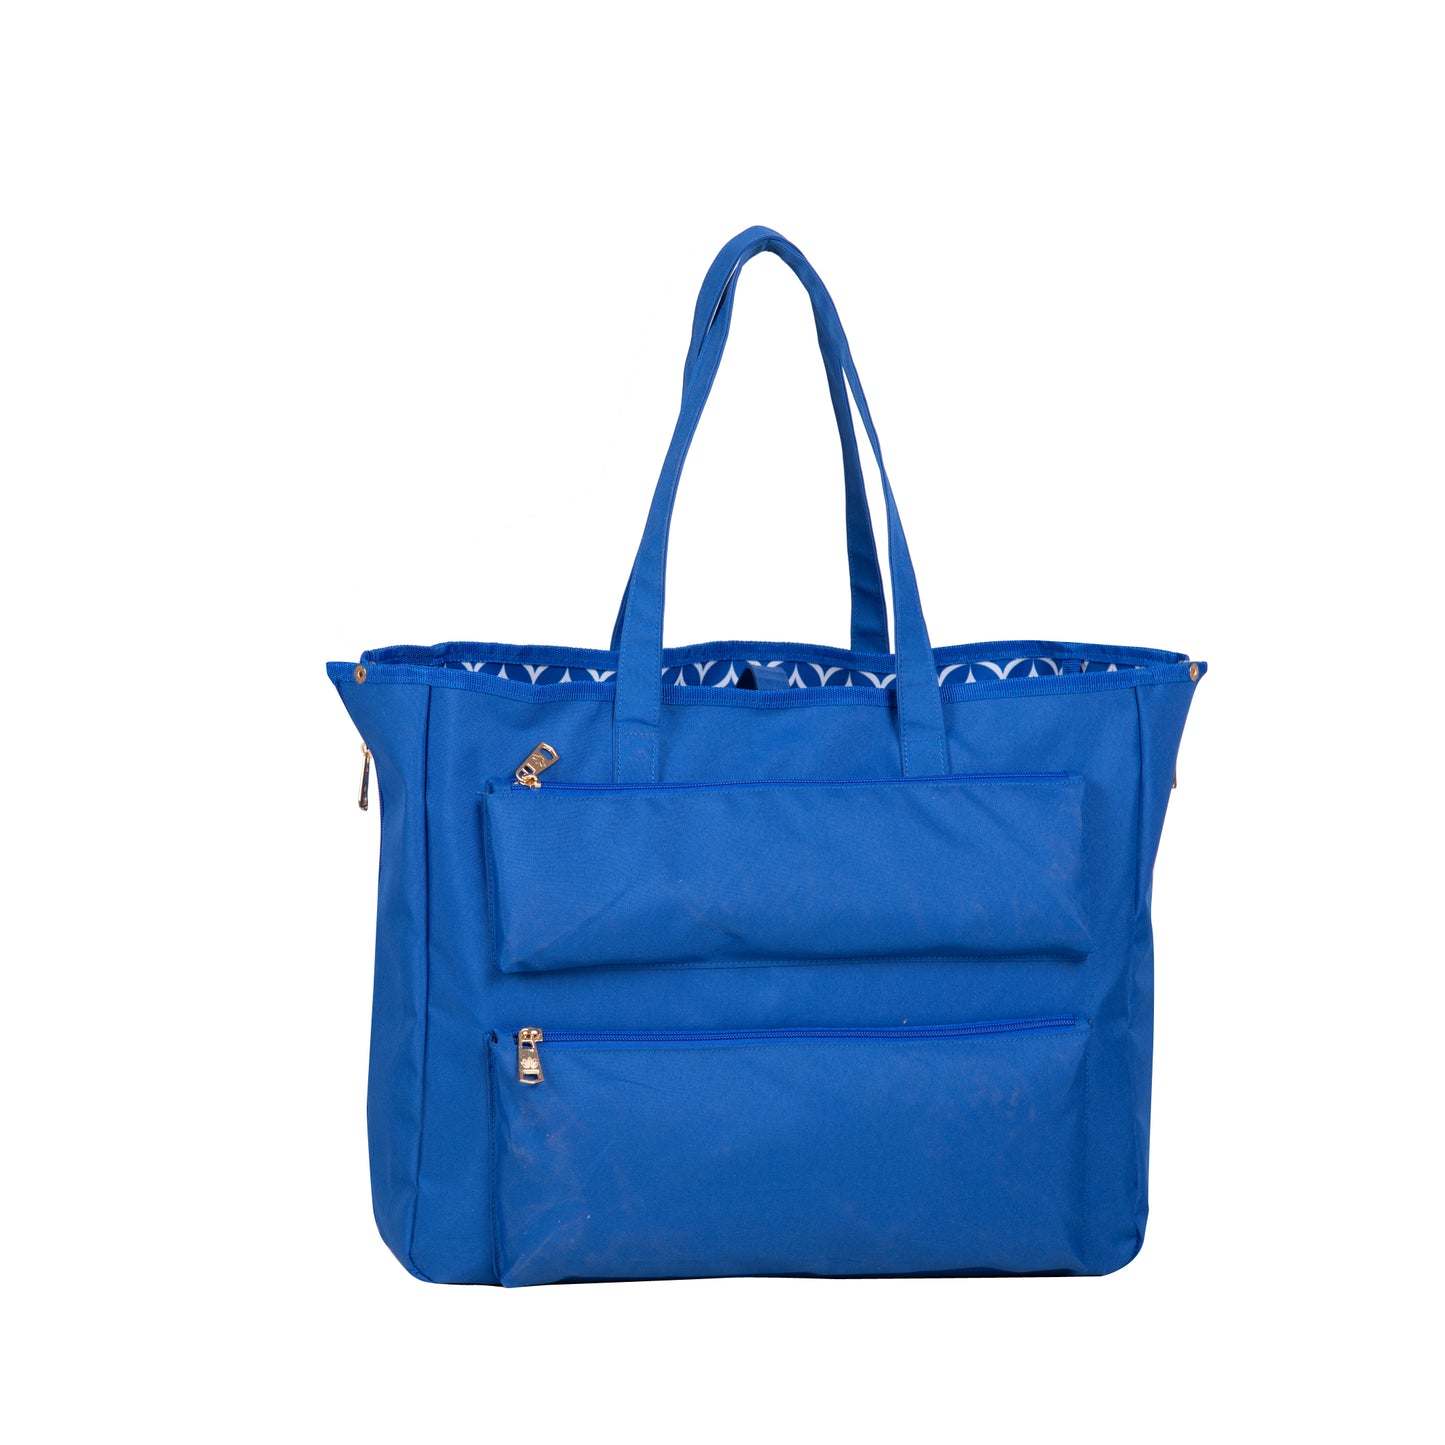 Jenni Chan Stars Reversible 2-in-1 Carry-All Tote